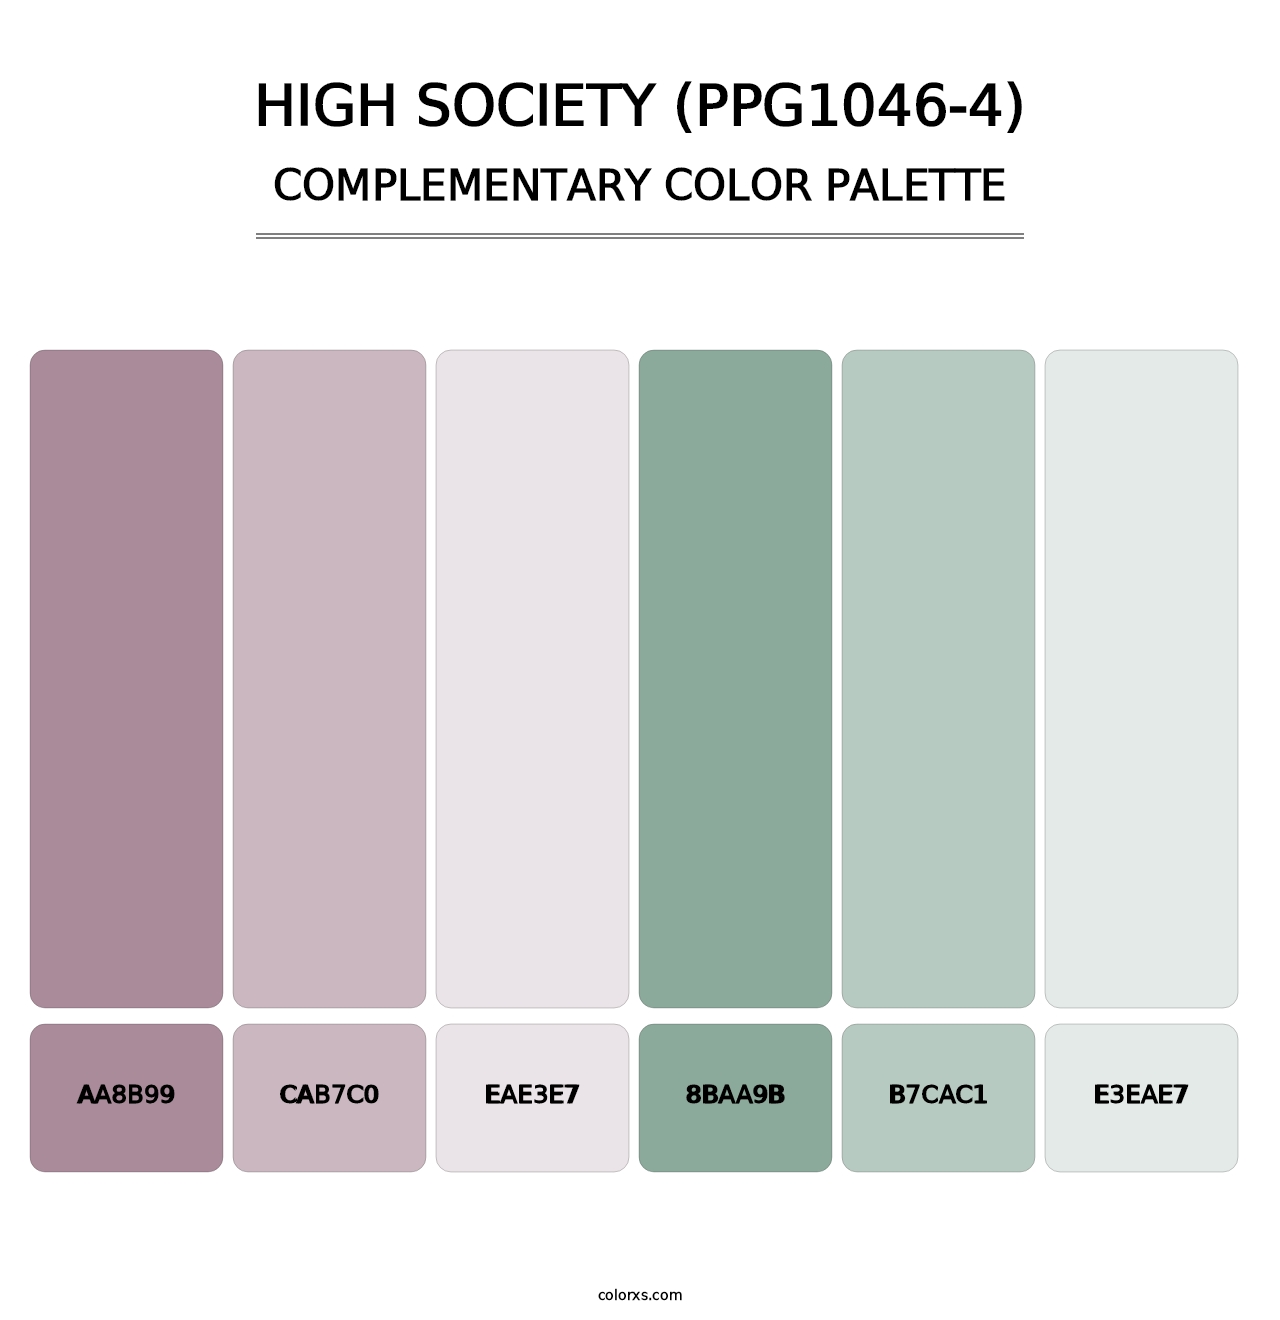 High Society (PPG1046-4) - Complementary Color Palette